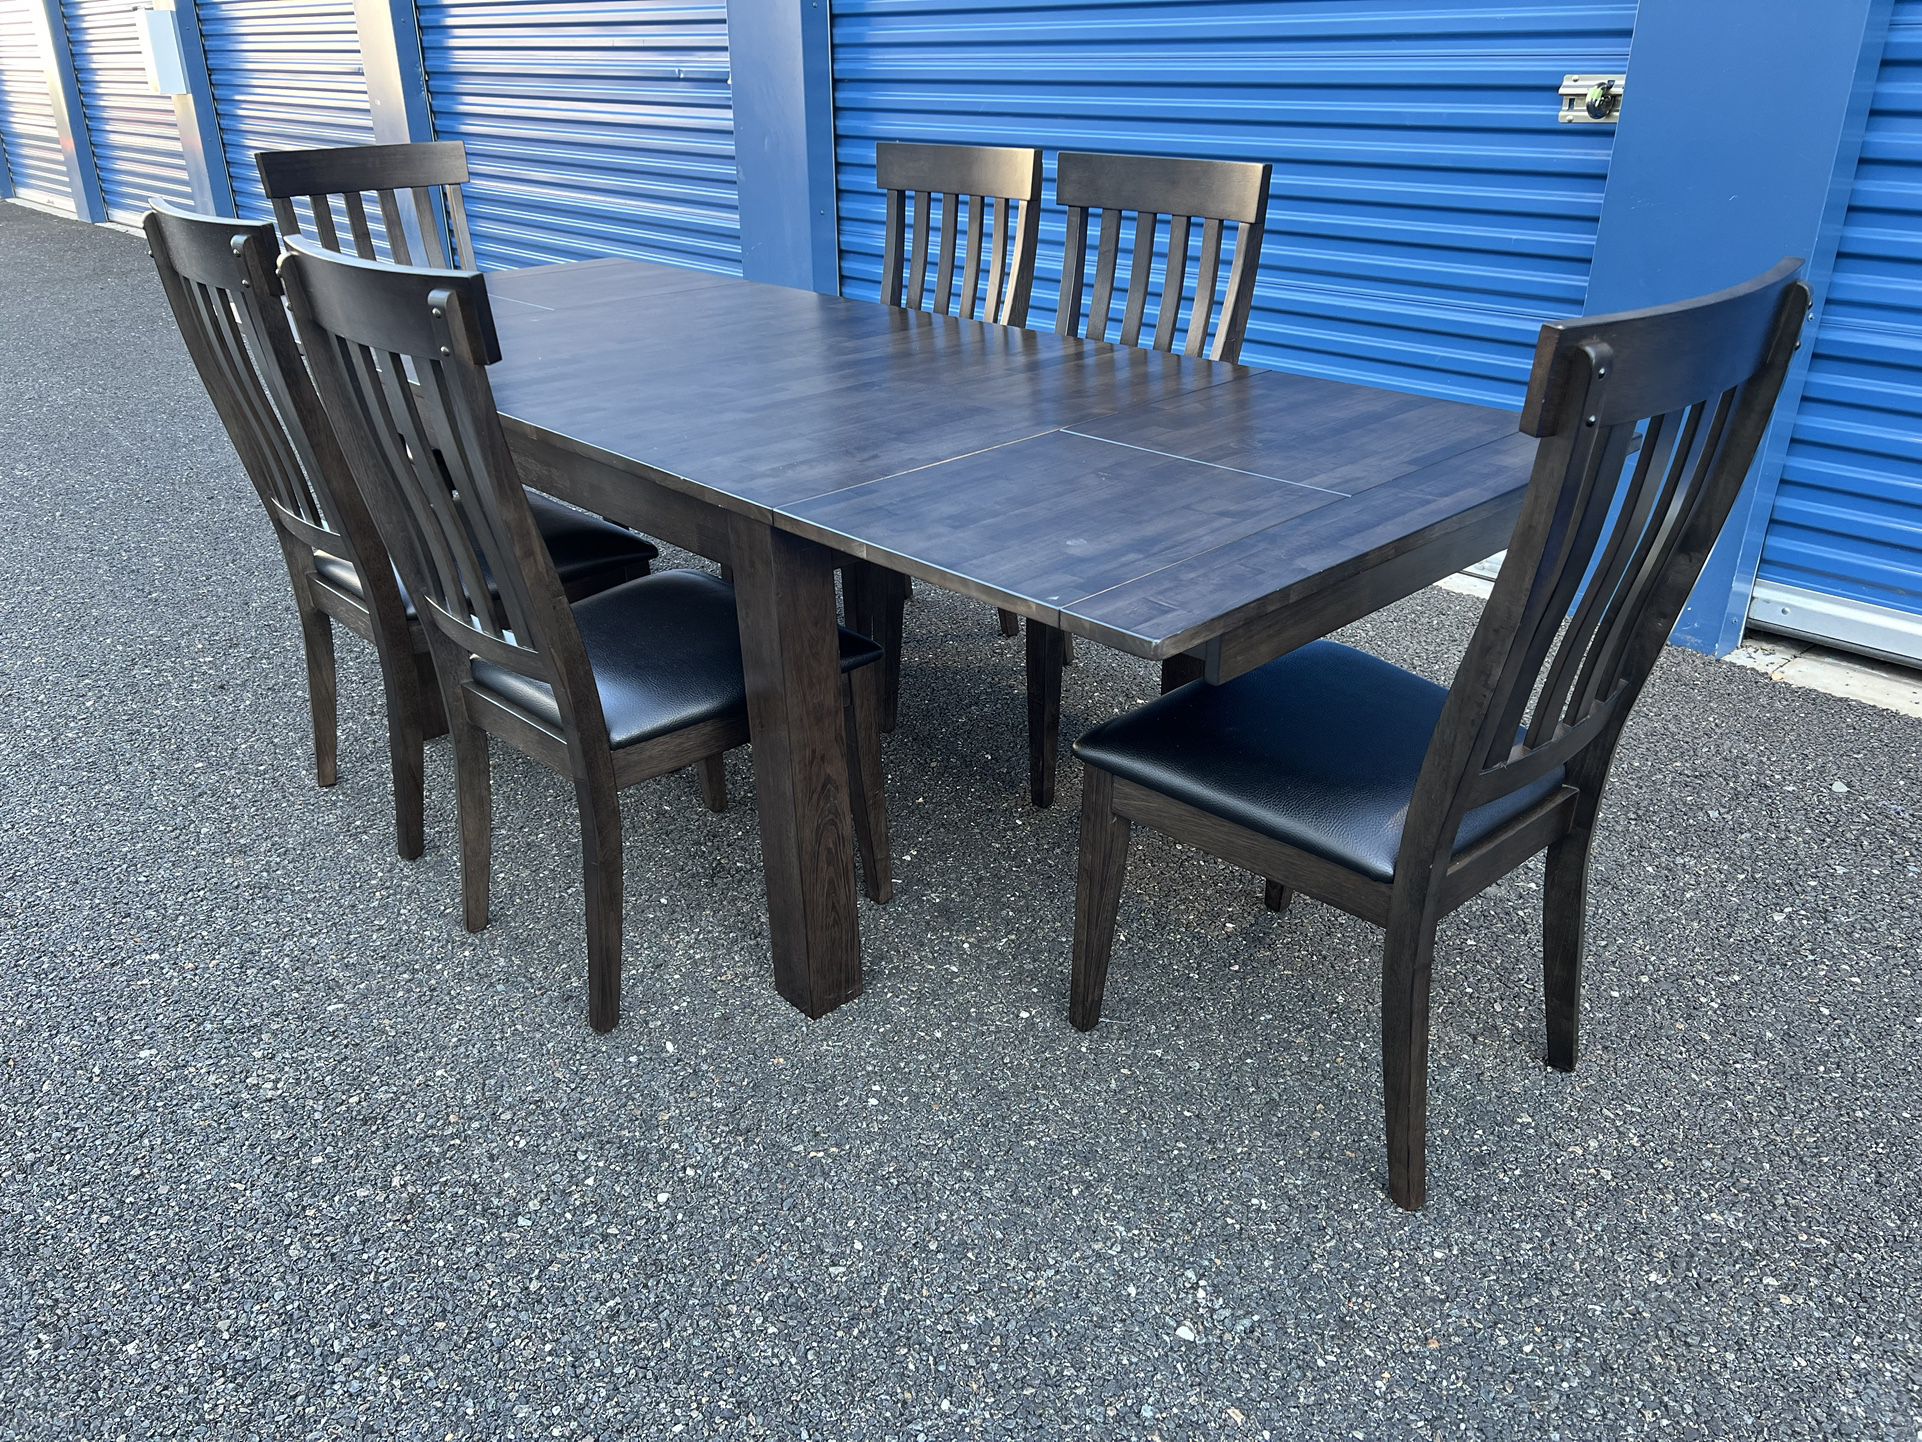 Dining Table Dining Set With 6 Chairs And 2 Leaves ! Wood Dining Table And Chairs ! Free Delivery